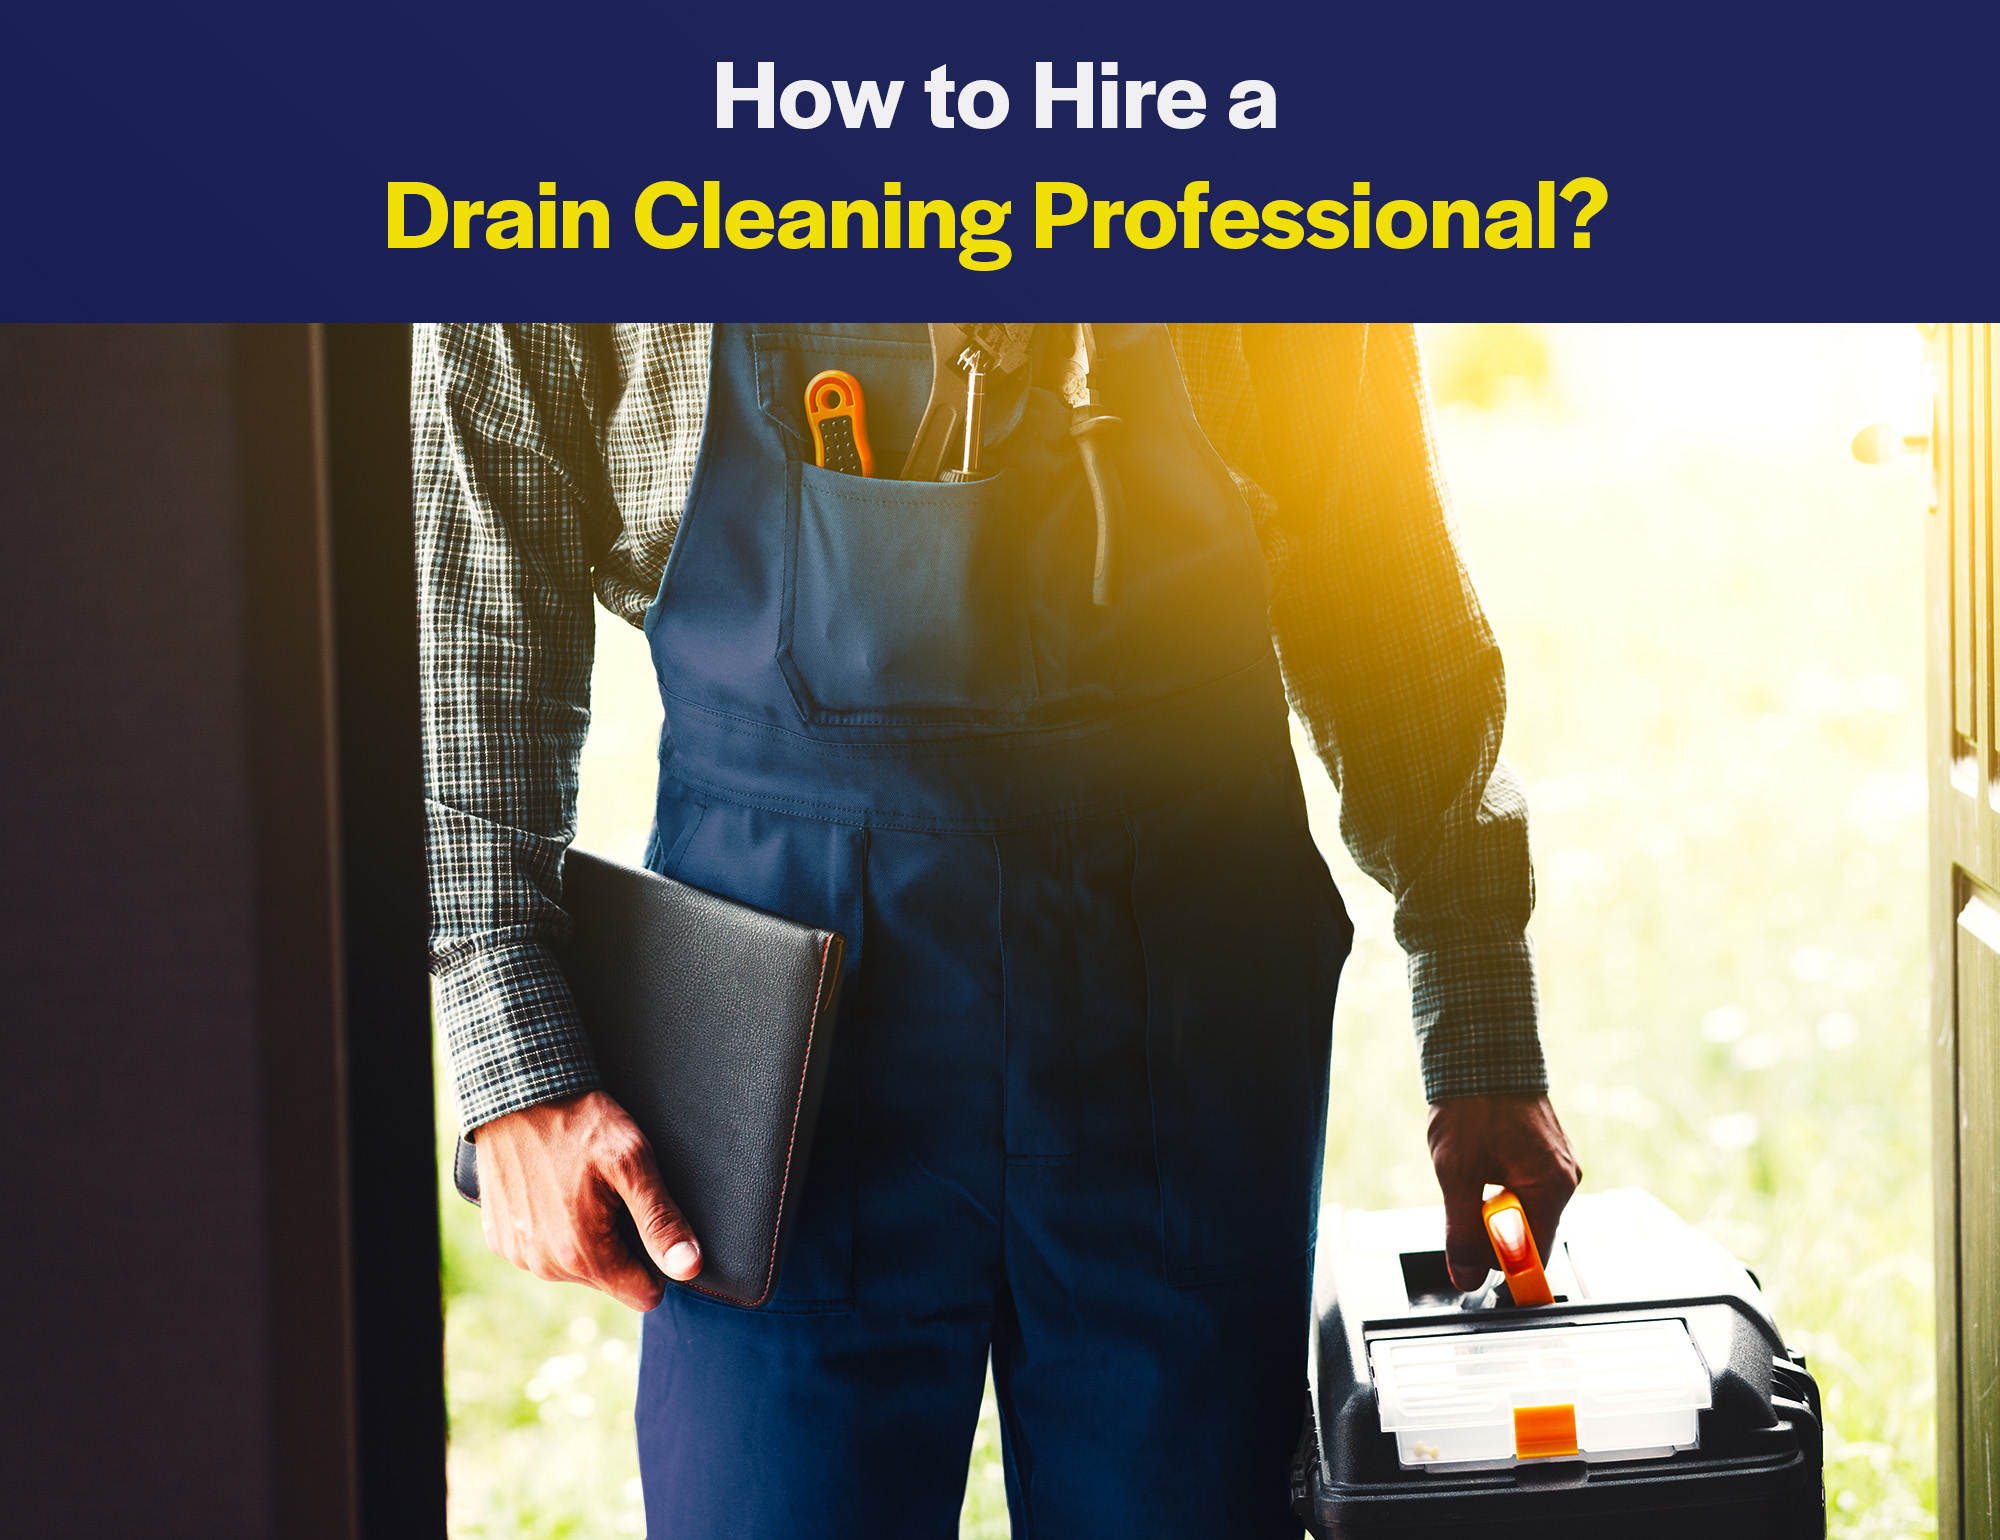 hire a drain cleaning professional